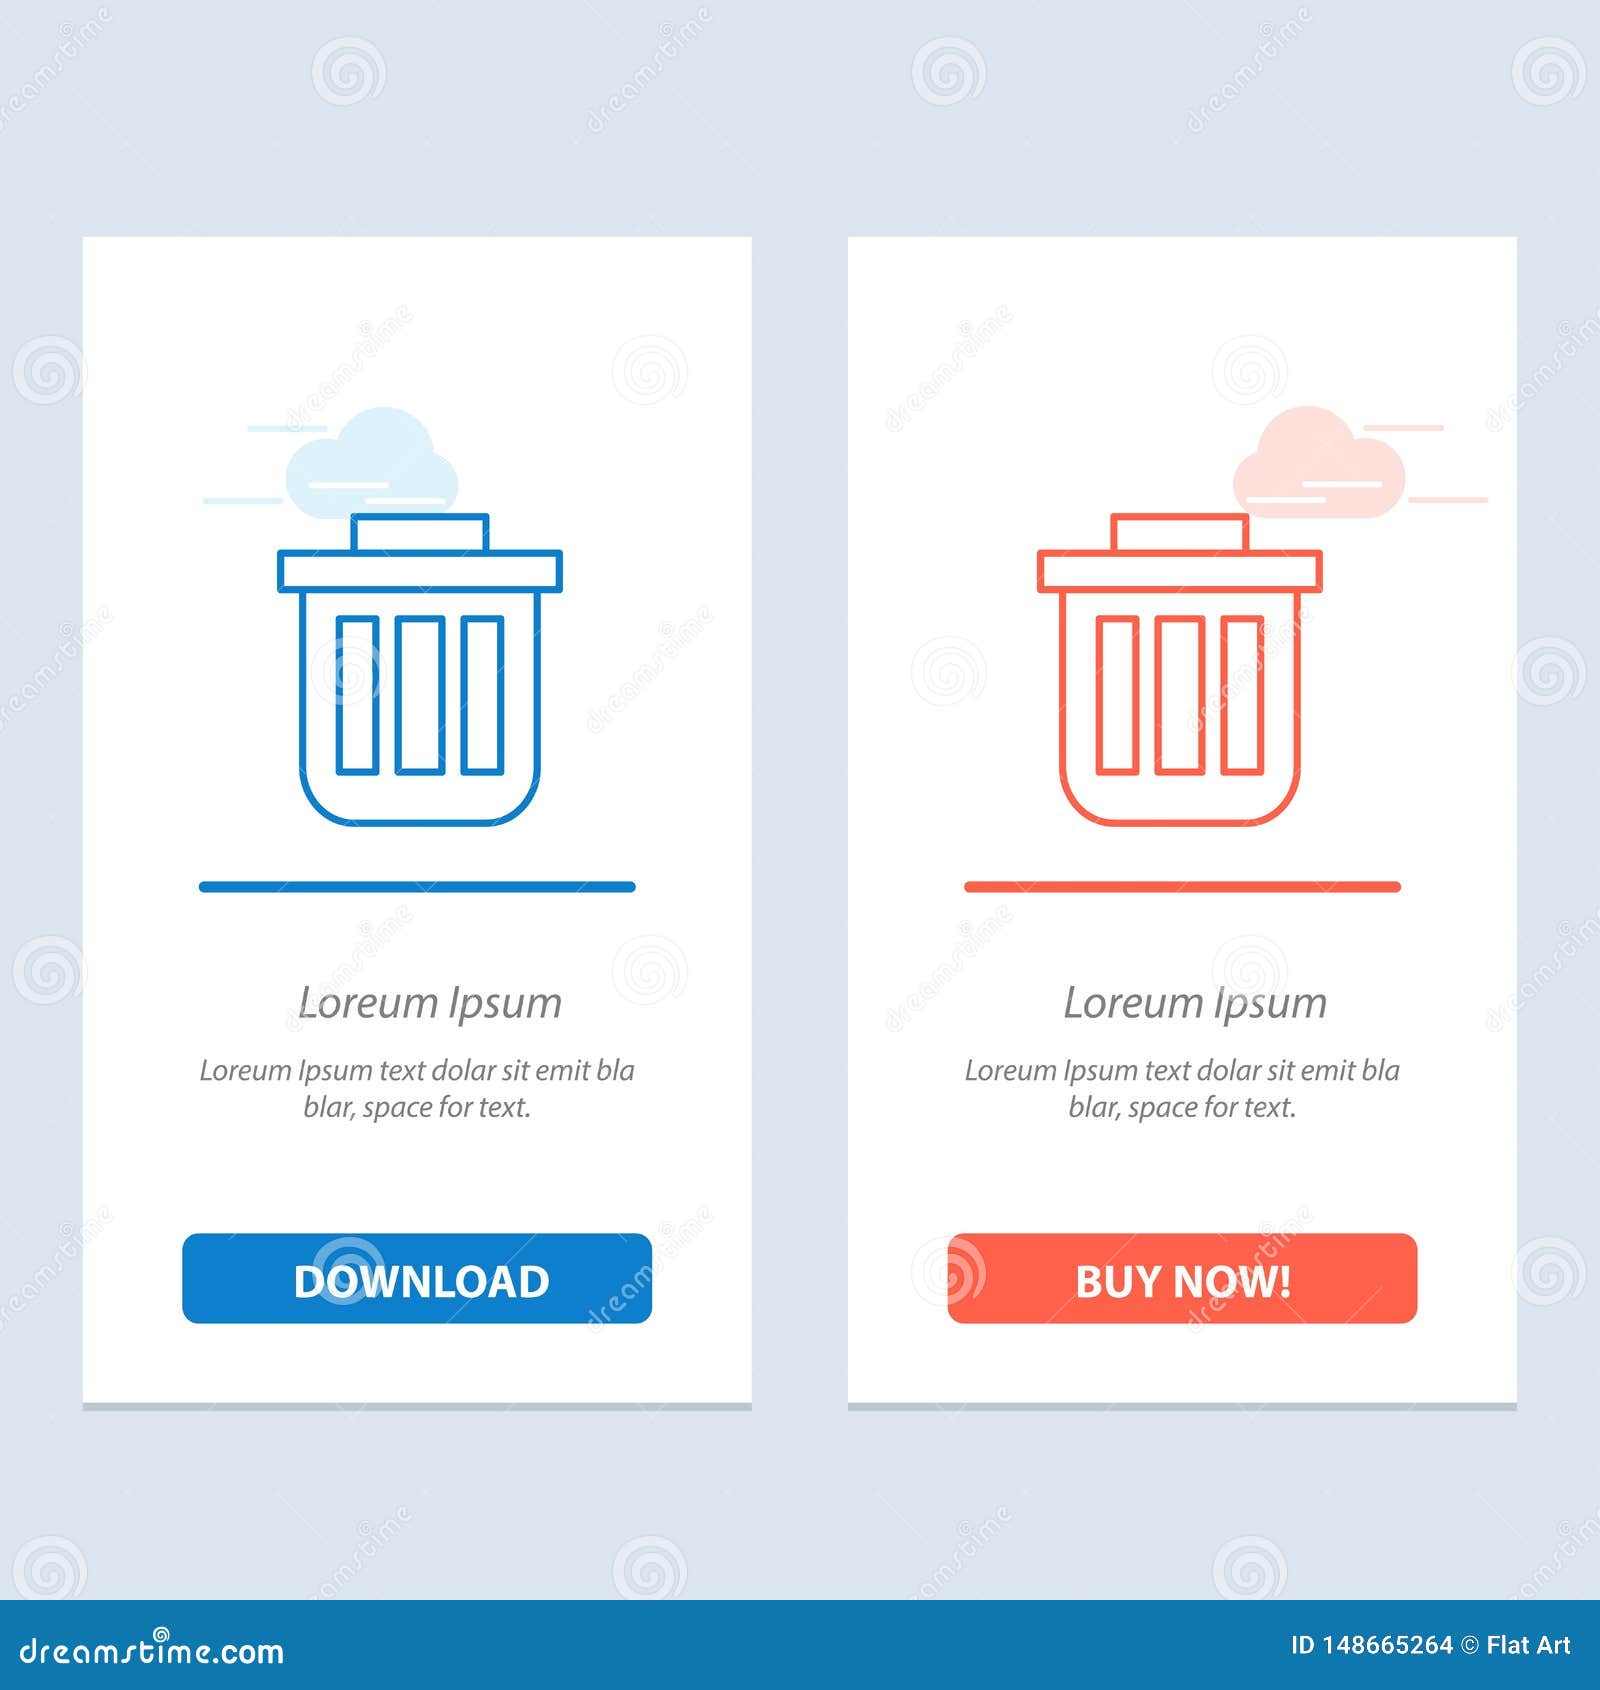 Trash, Basket, Bin, Can, Container, Dustbin, Office Blue and Red Intended For Bin Card Template